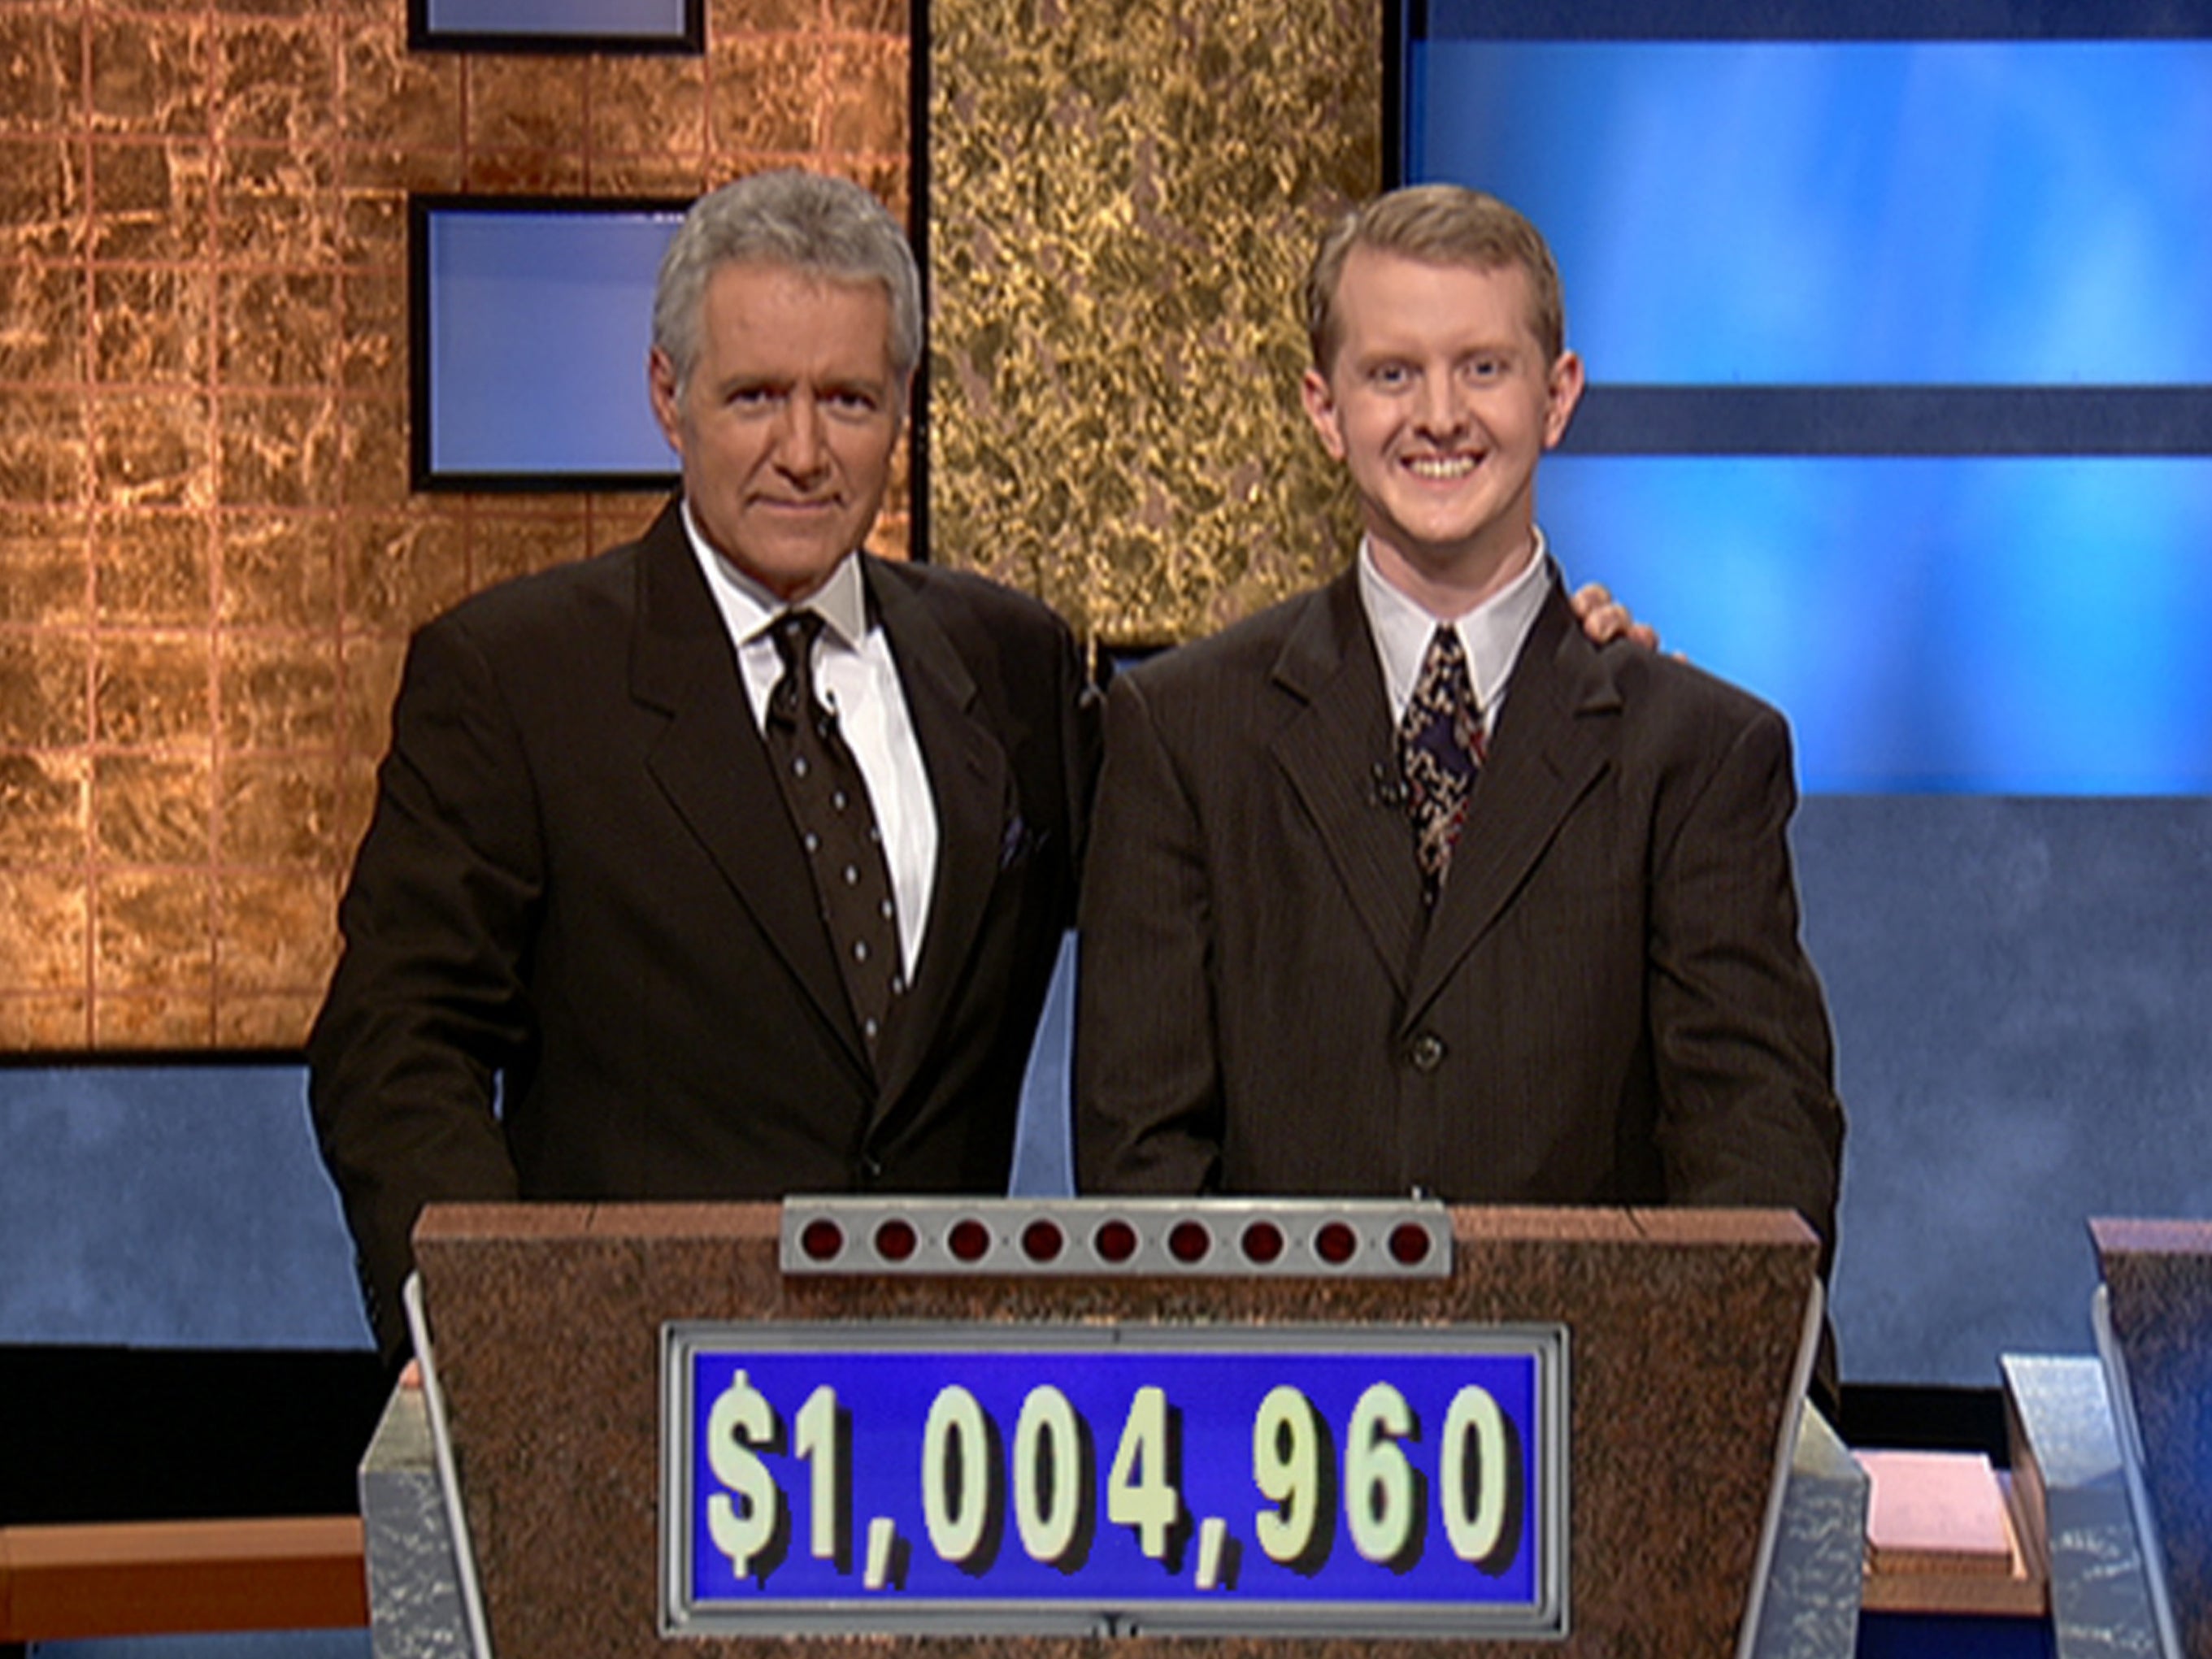 Alex Trebek poses with Ken Jennings on 14 July 2004 in Culver City, California